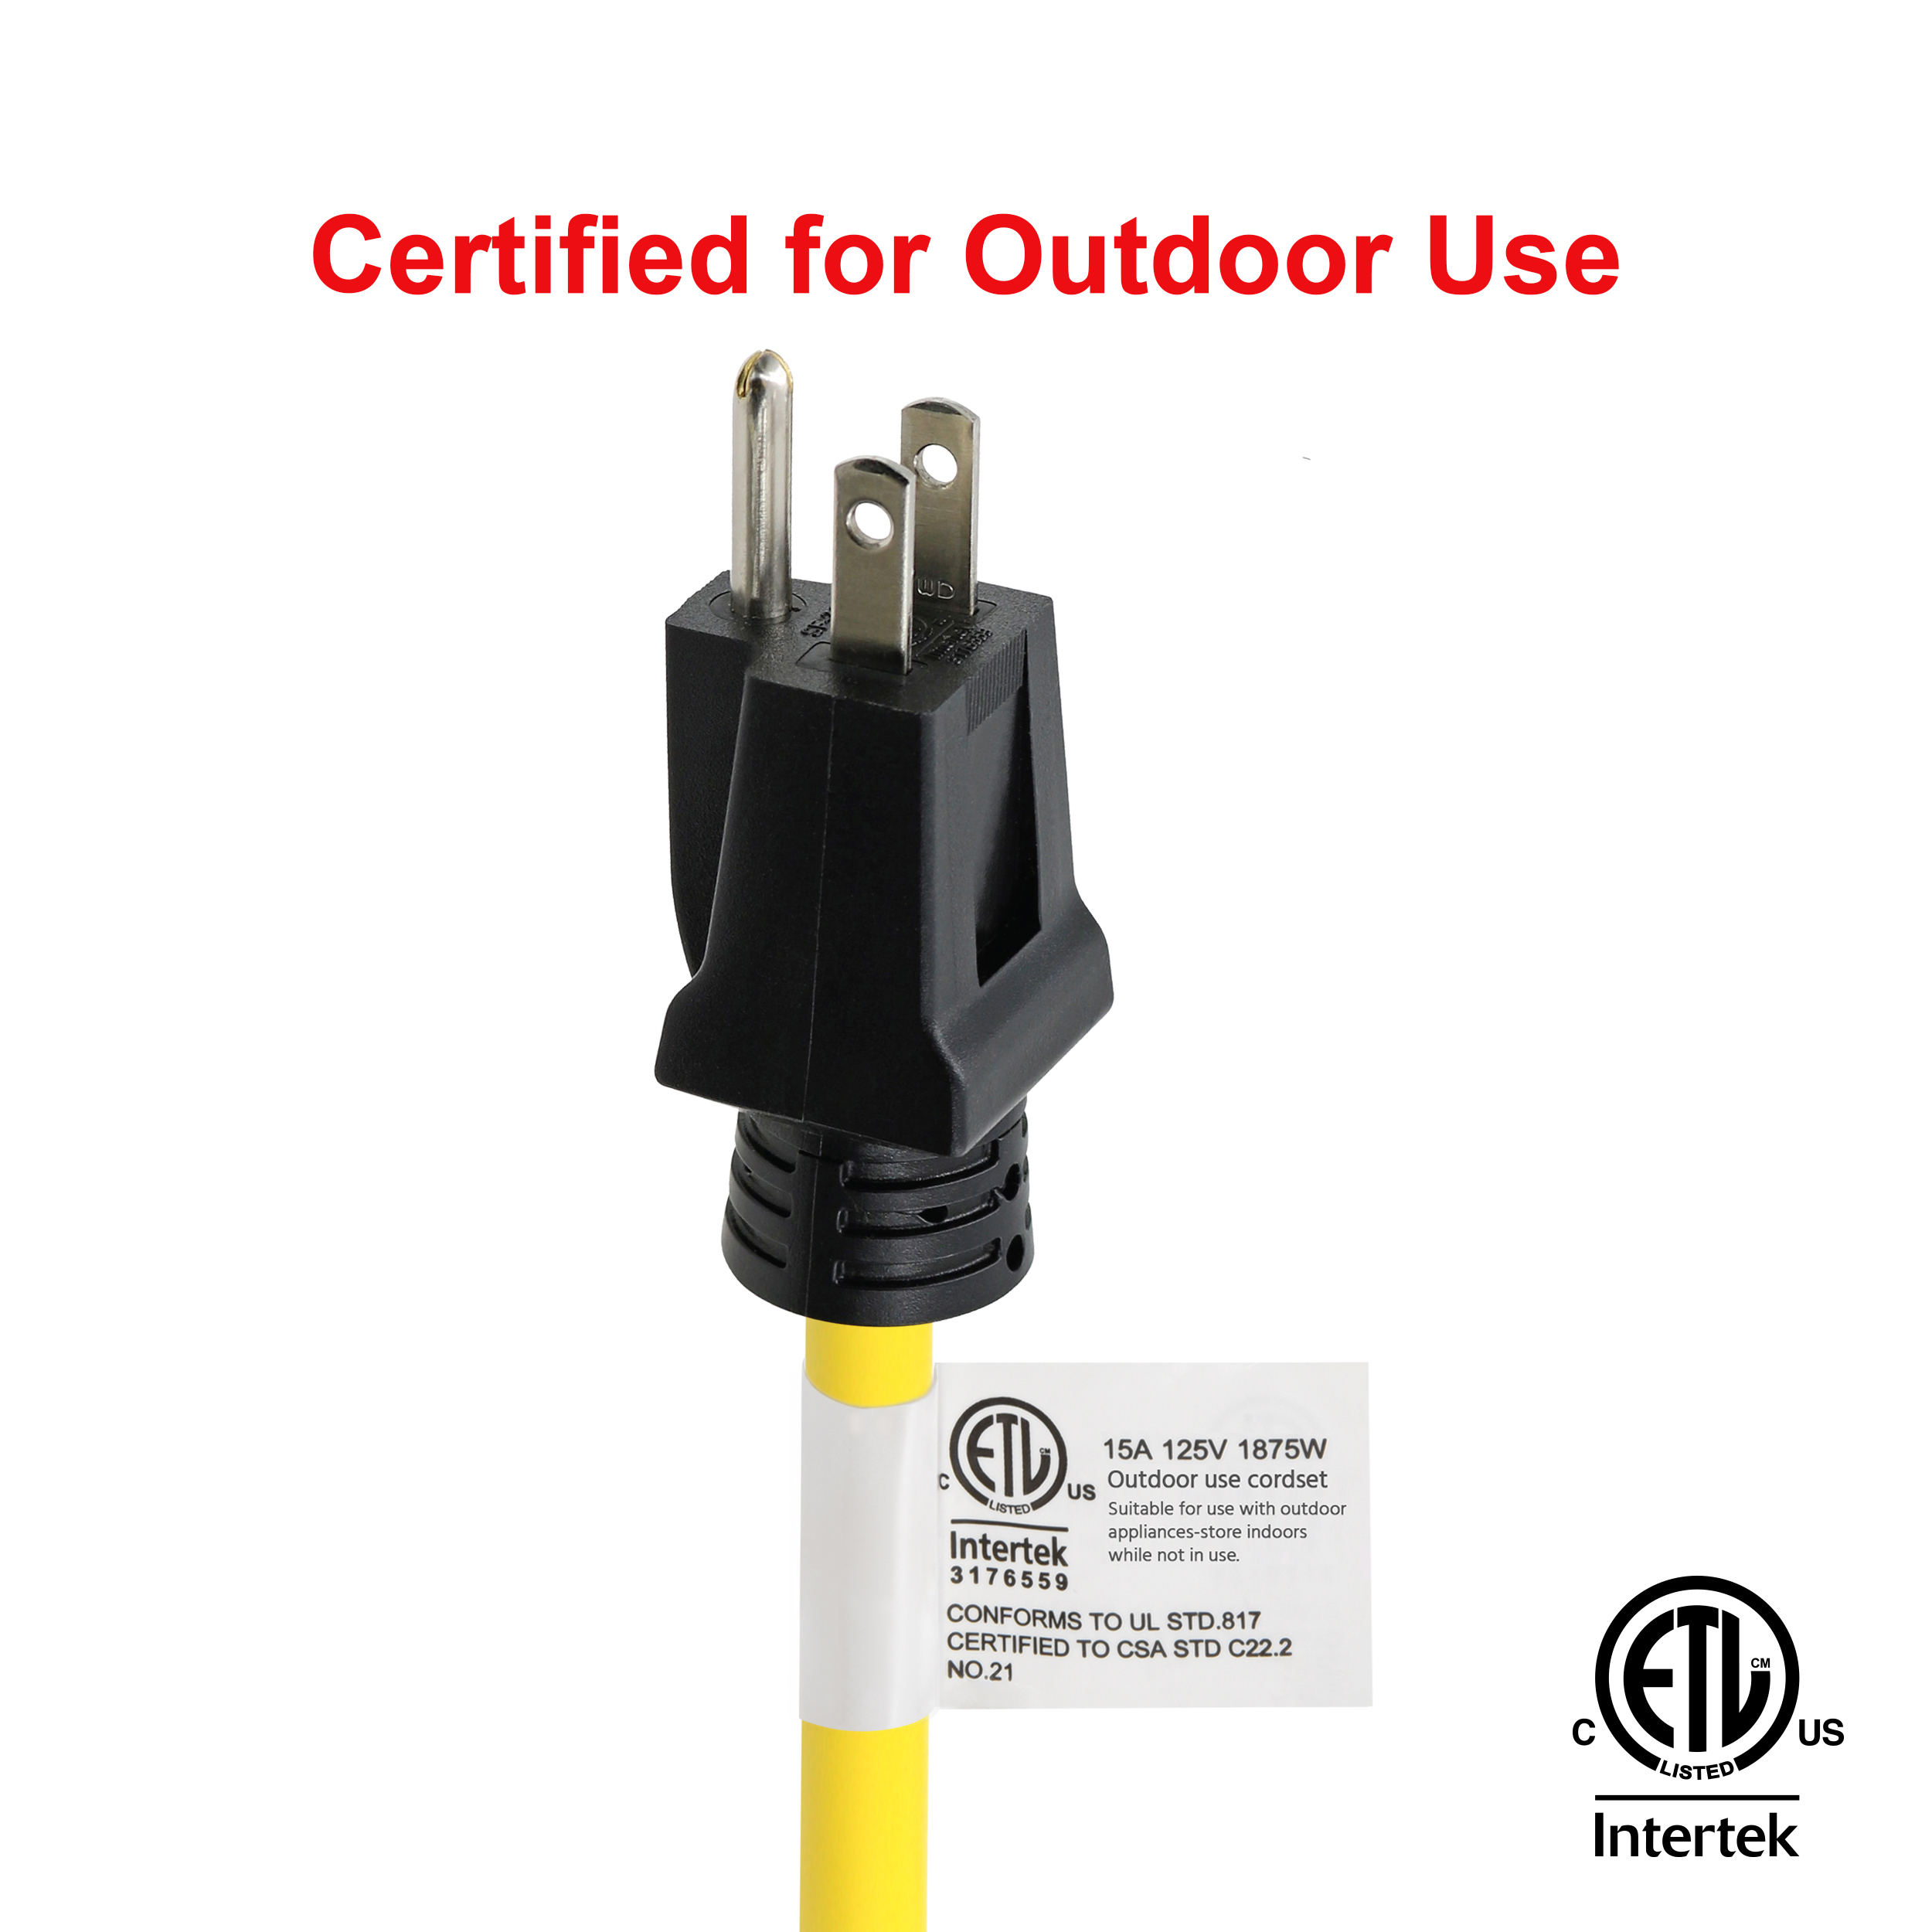 Clear Power 12/3 SJTW 25 ft Heavy Duty Outdoor Extension Cord, Yellow, CP10144 - image 3 of 11